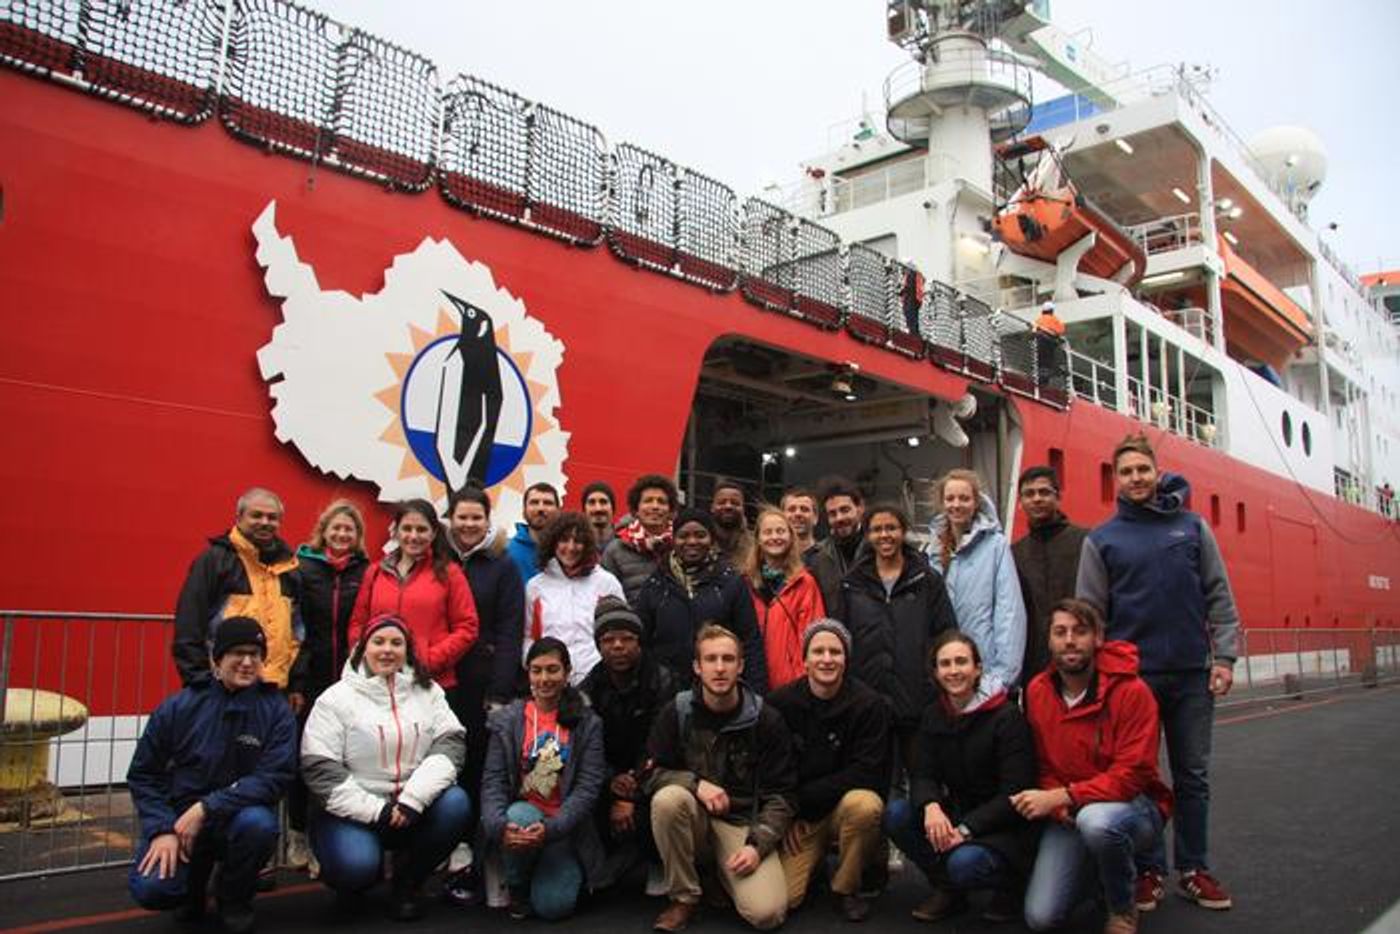 Team South Africa getting ready to board South Africa's polar research vessle, the SA Agulhas II, for the 2019 expedition to Antarctica./ Credit: Wiida Fourie-Basson